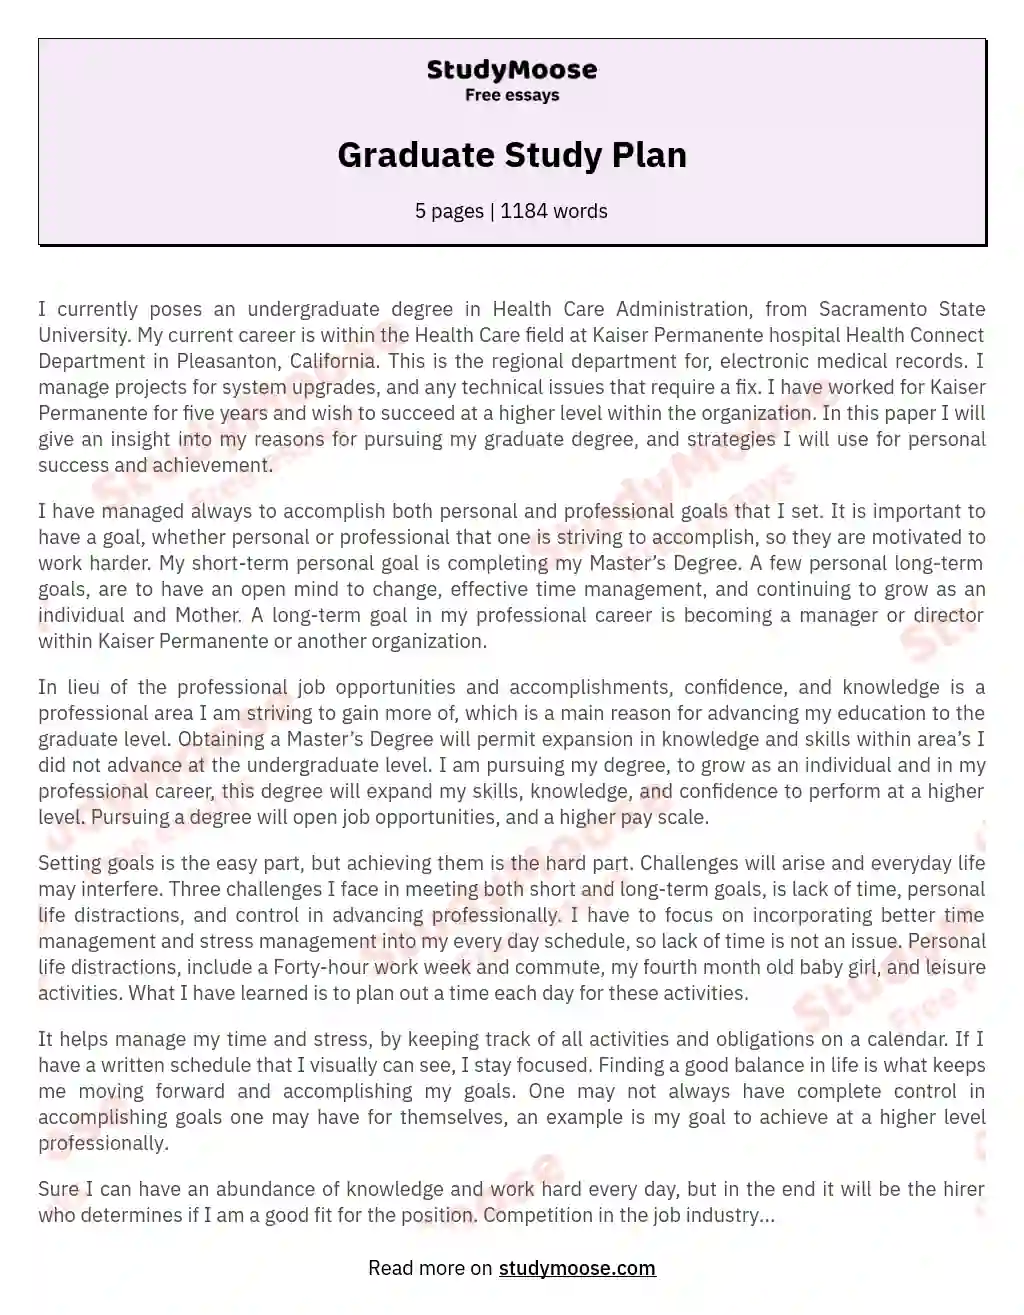 essay about study in university